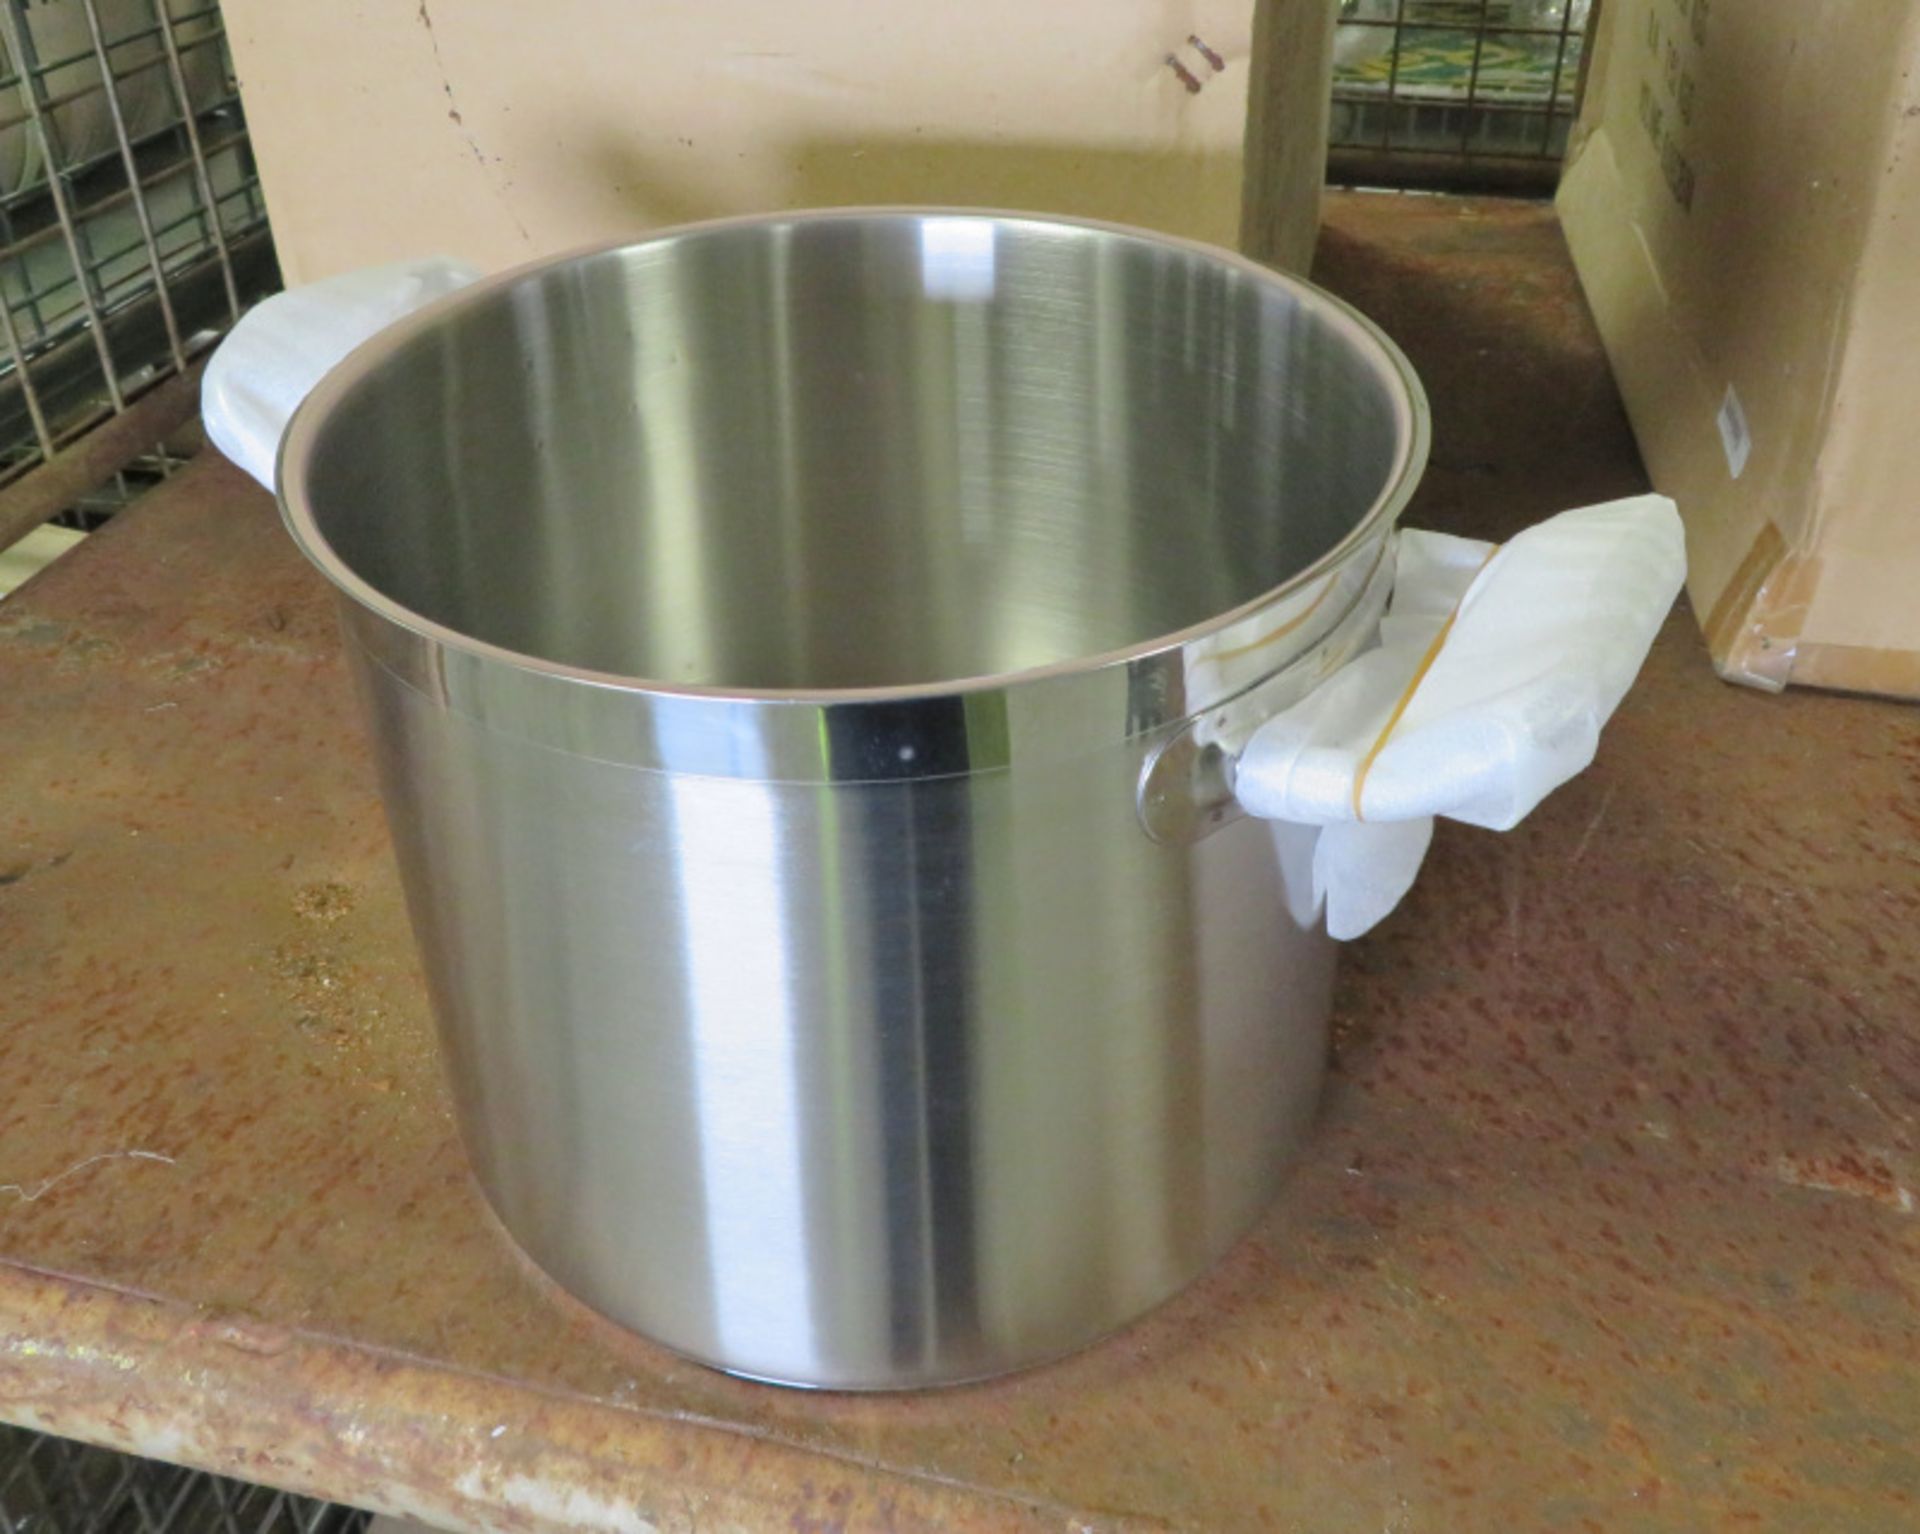 6x 9.5 inch Stainless Steel Deep Cooking Pots - Image 2 of 3